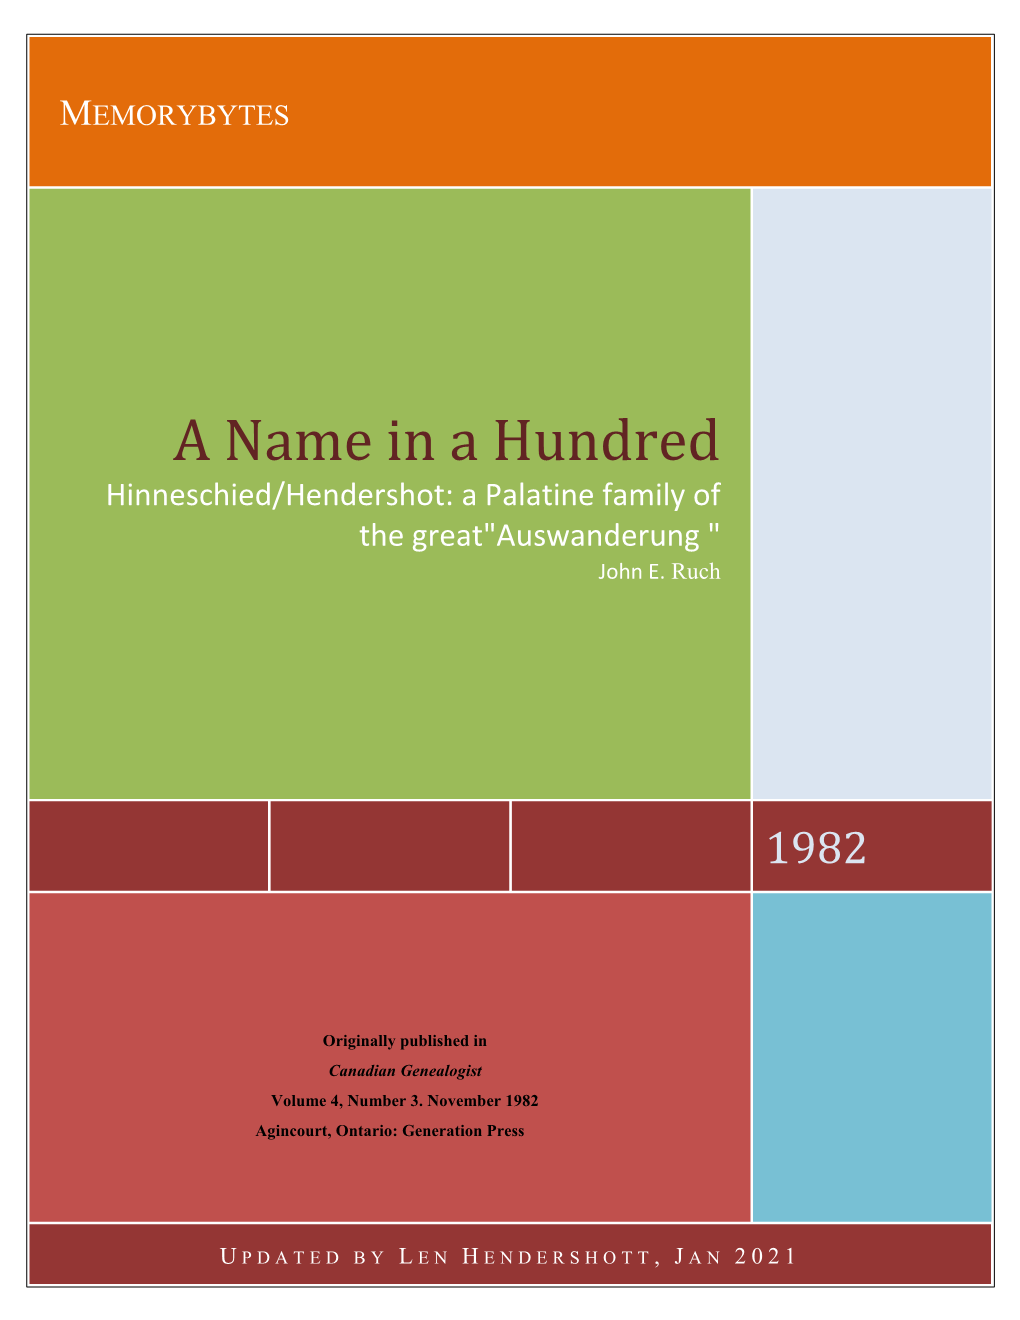 A Name in a Hundred: Hinneschied/Hendershot Geneology